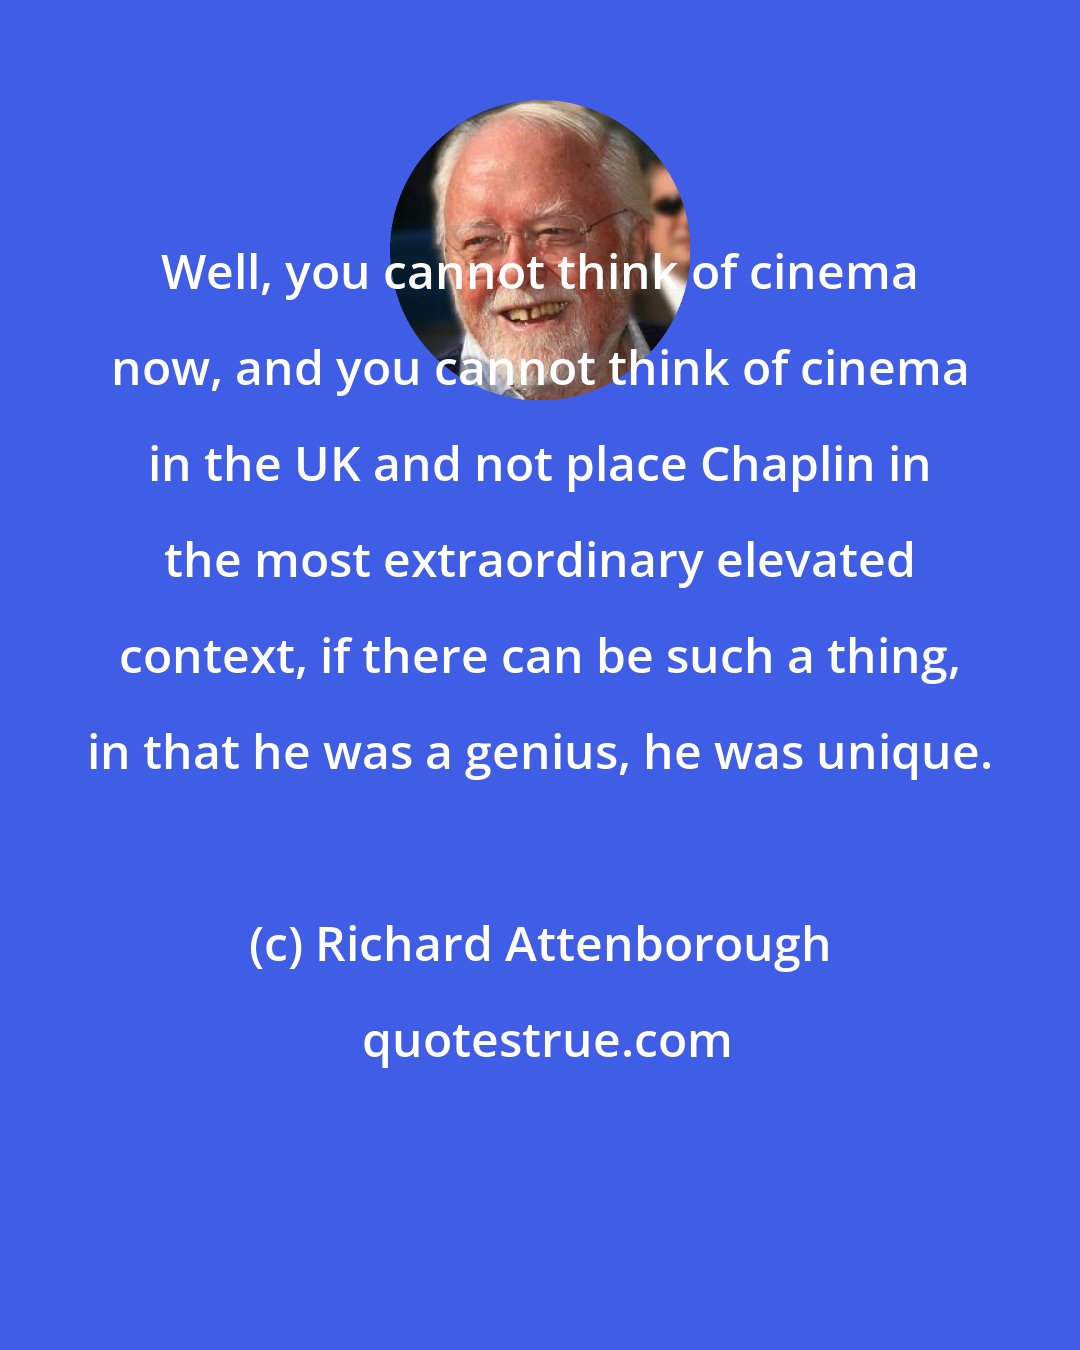 Richard Attenborough: Well, you cannot think of cinema now, and you cannot think of cinema in the UK and not place Chaplin in the most extraordinary elevated context, if there can be such a thing, in that he was a genius, he was unique.